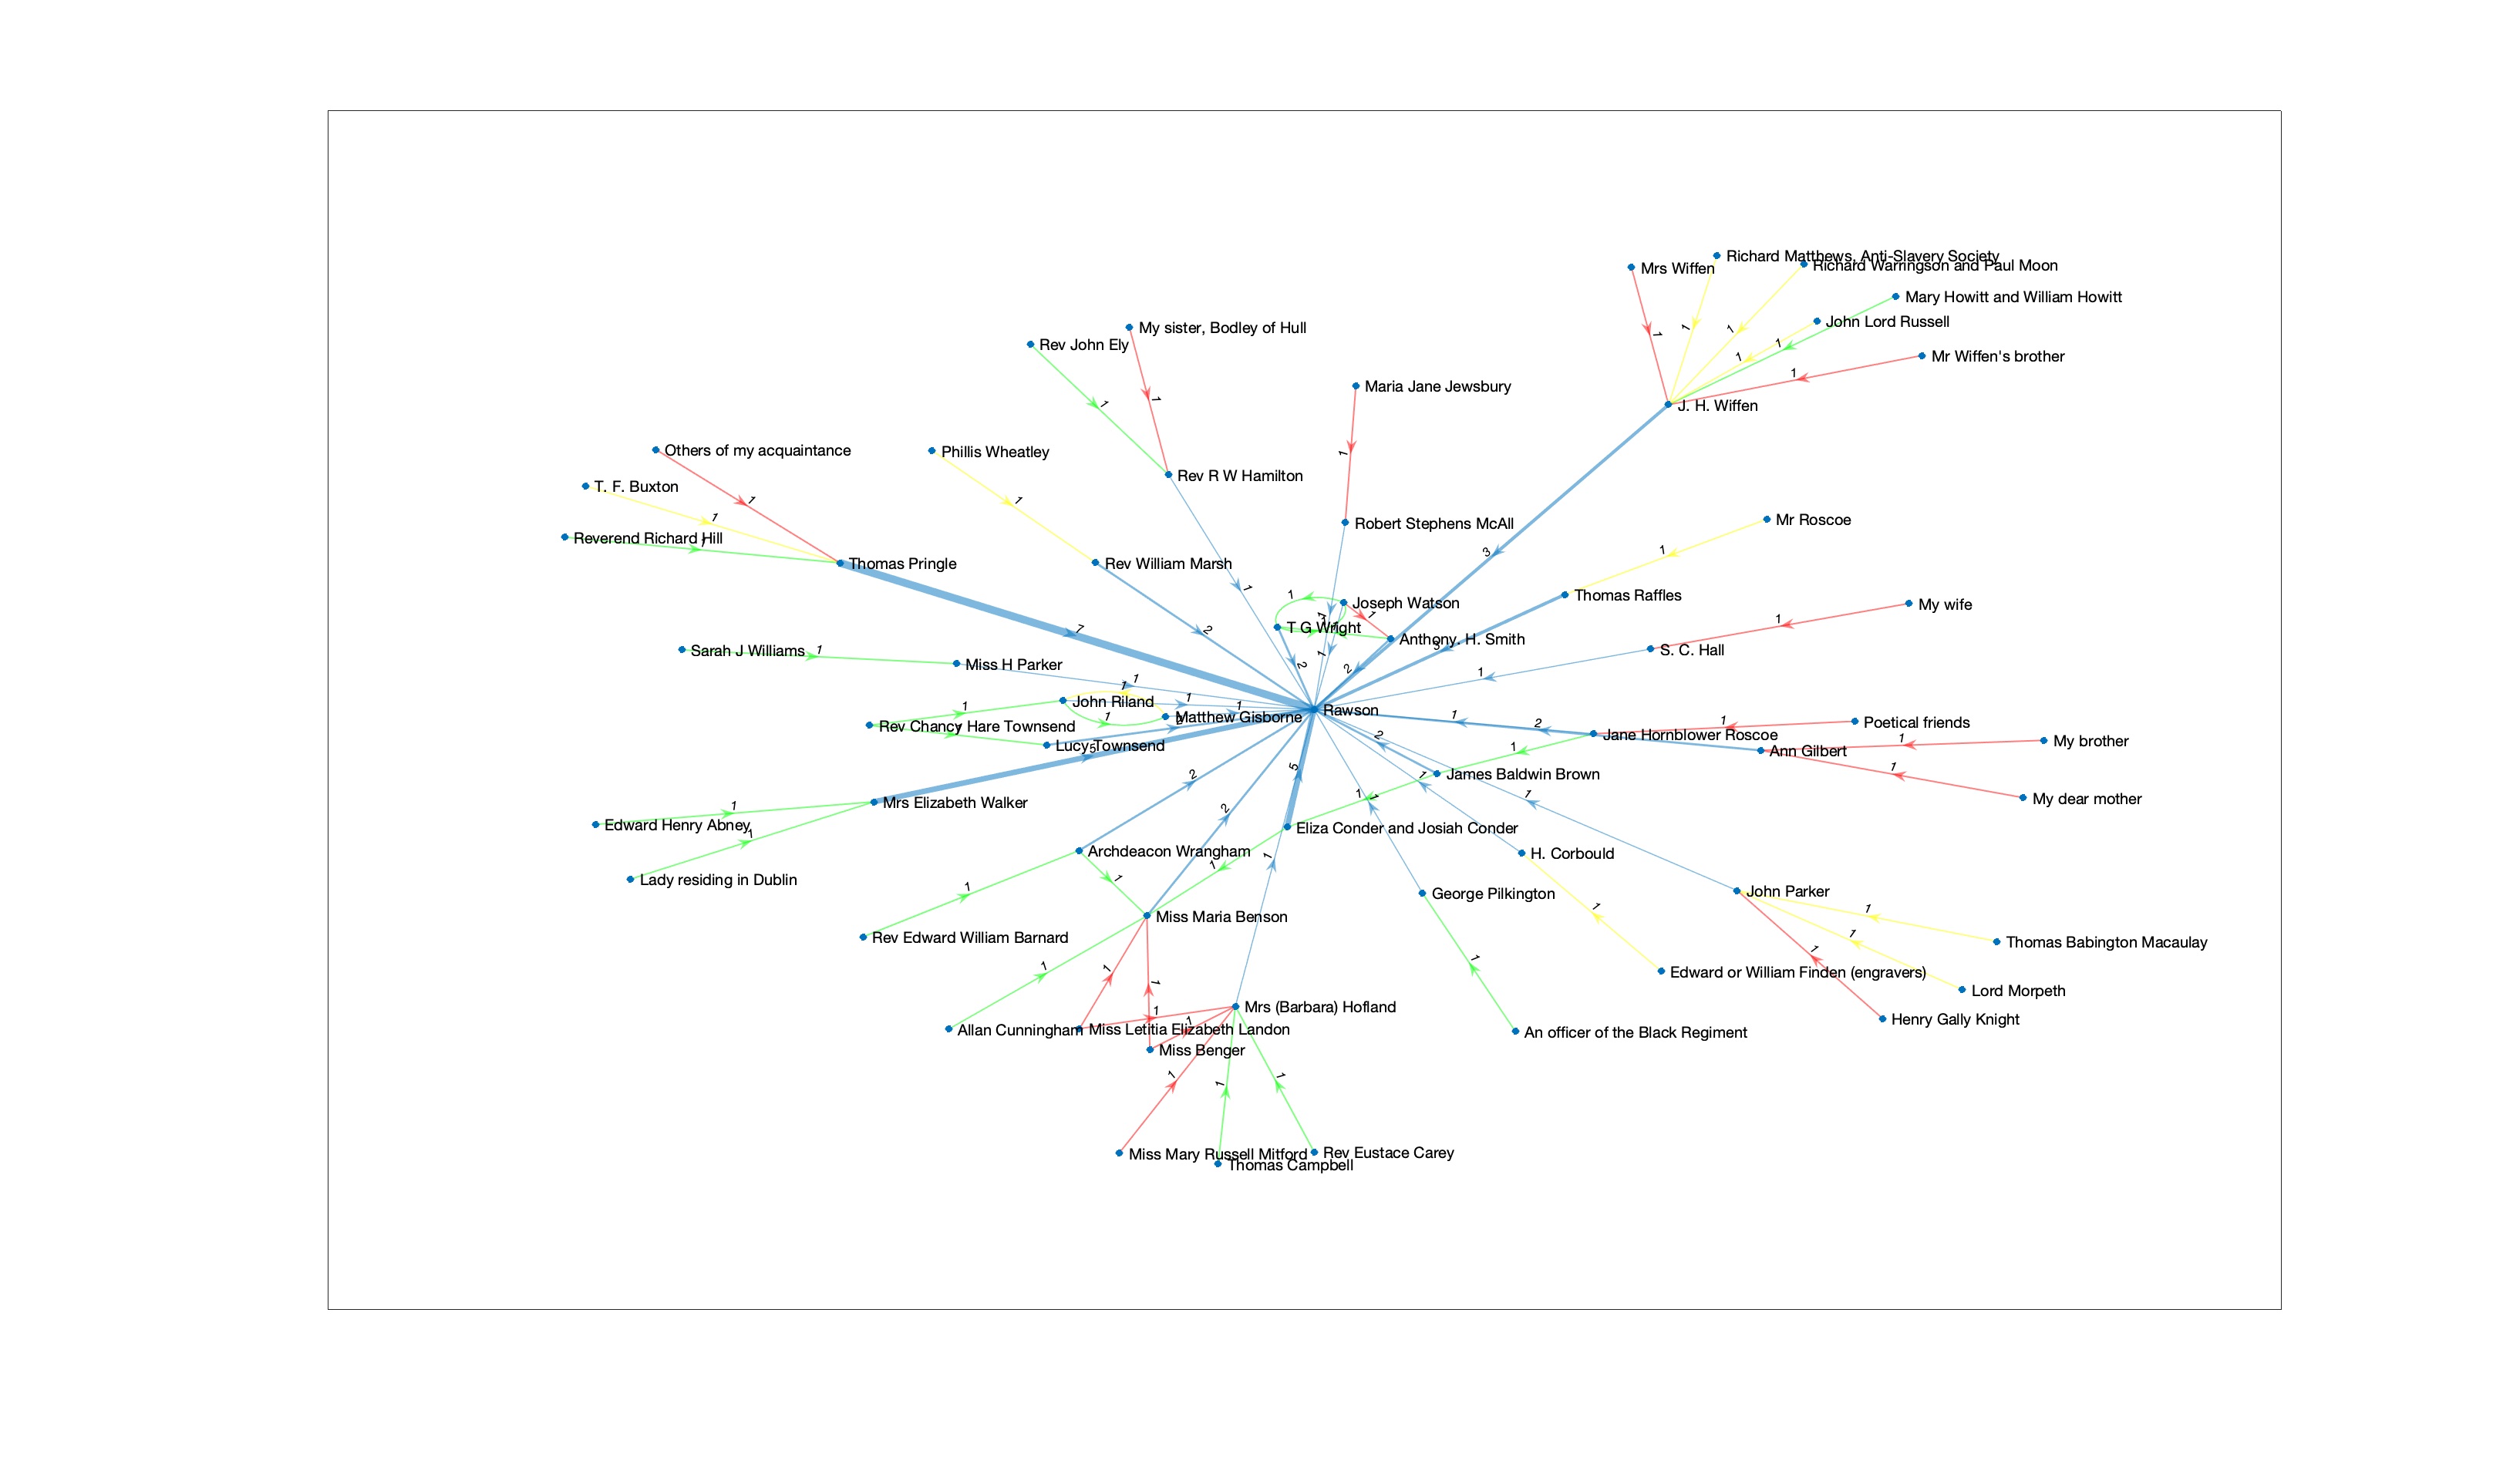 Network graph visualizing correspondents and their recommendations for
            contributors